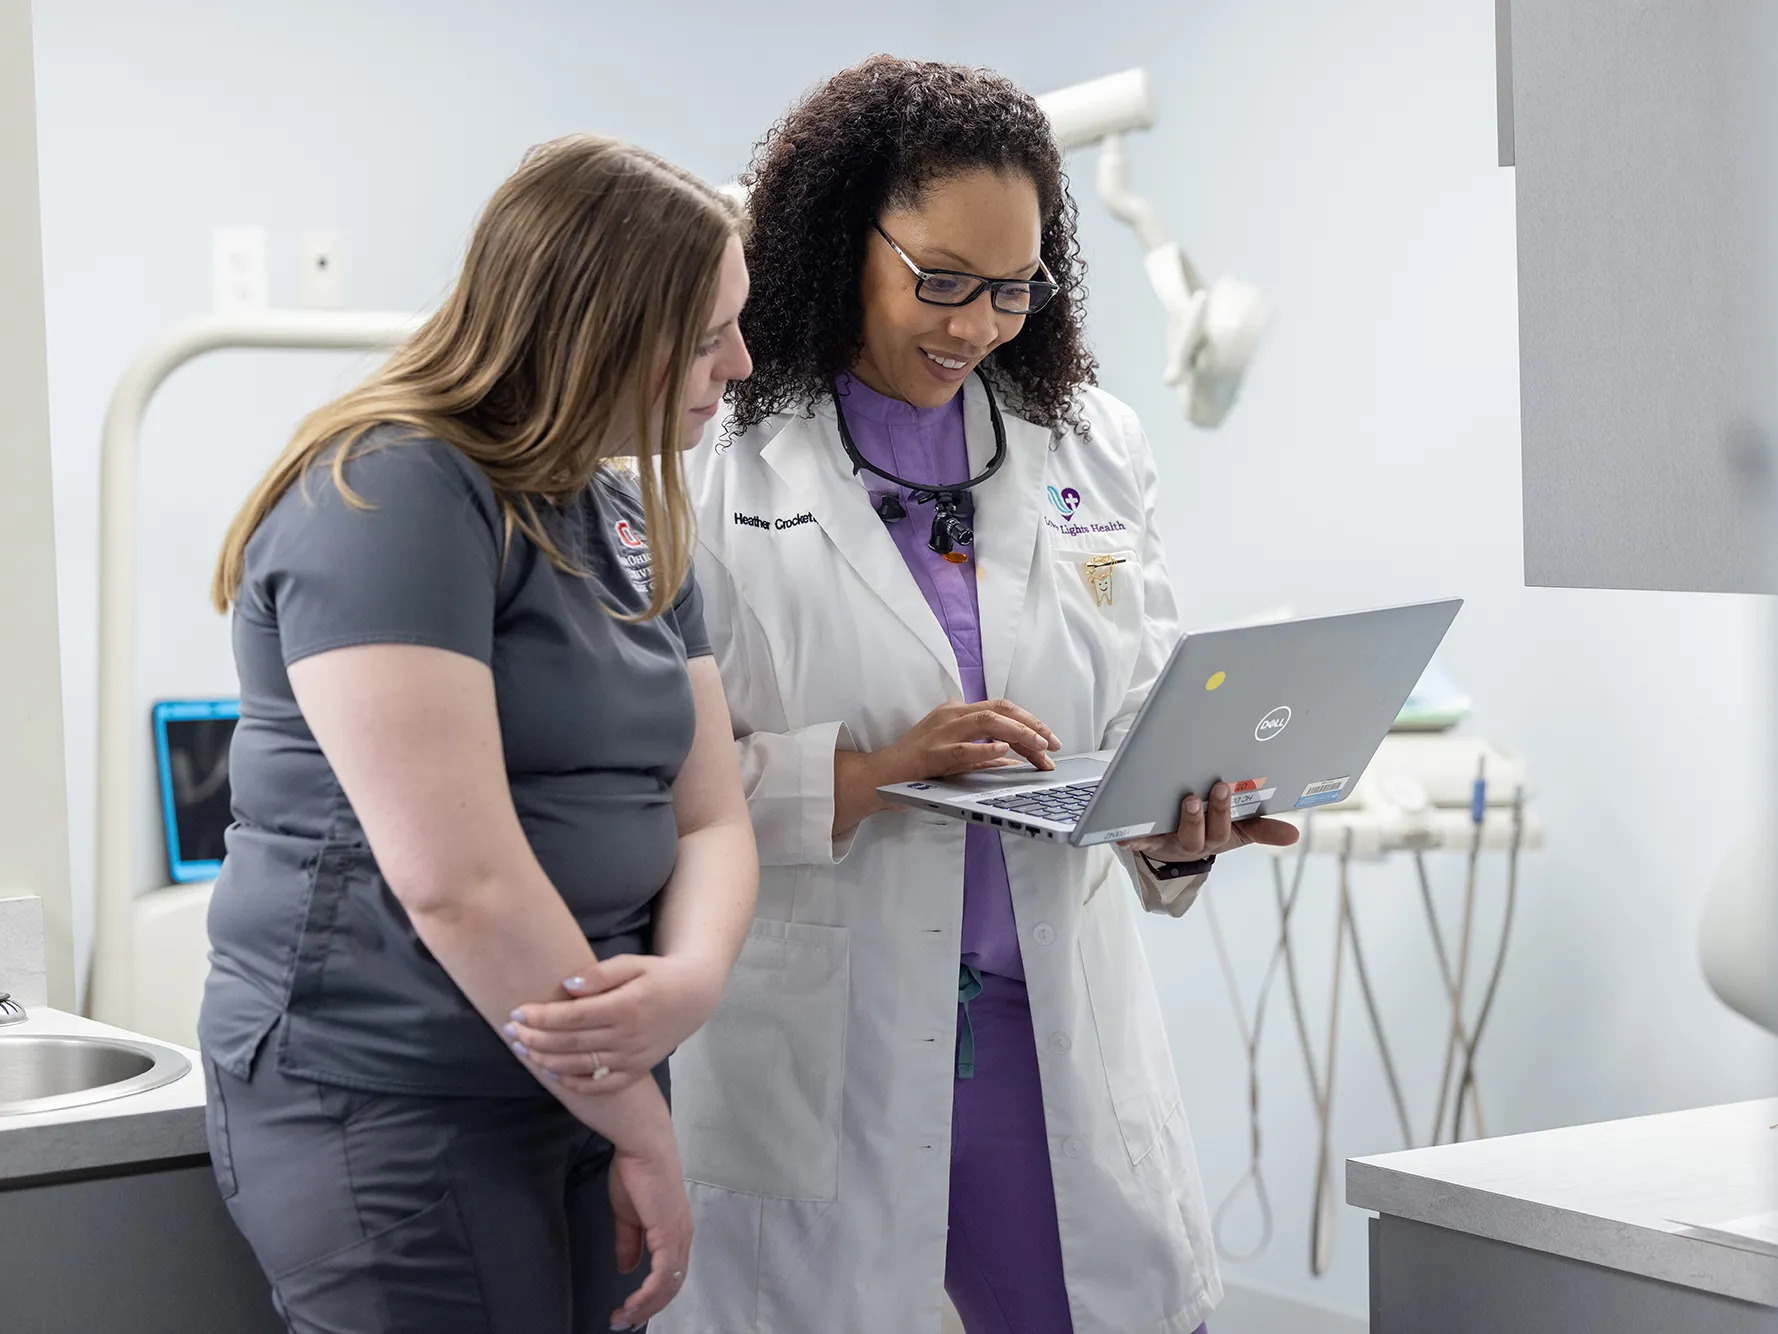 A student in Ohio State scrubs leans in to see the laptop held by a professional dentist wearing a white doctor’s coat. The dentist is a black woman with curly hair and glasses. She’s smiling as she shows the student the screen. The student is a young white woman with long hair and she seems thoughtful.